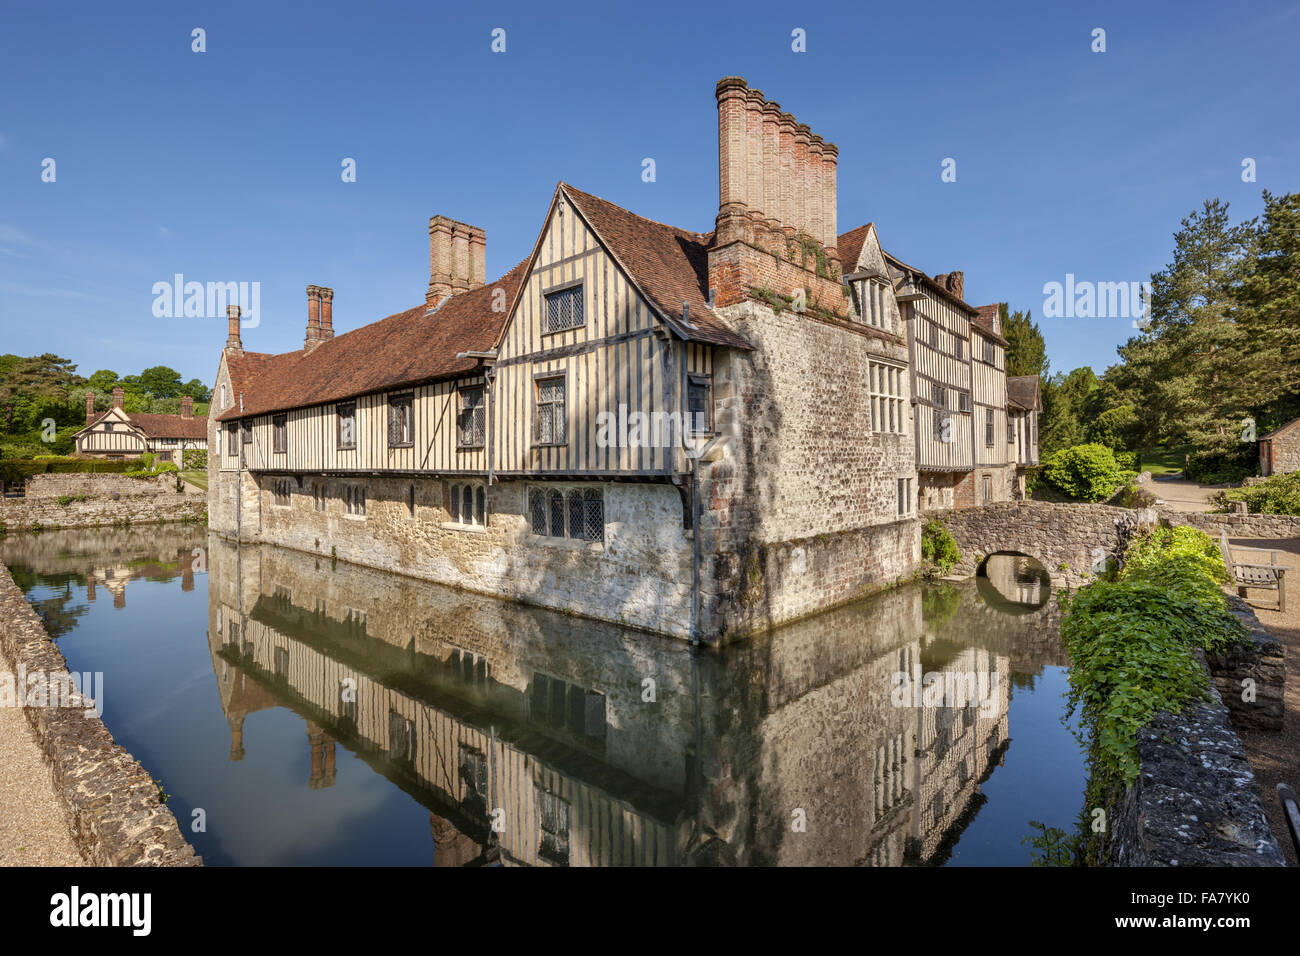 L'angolo sud est con i cottages in background a Ightham Mote, Kent Foto Stock